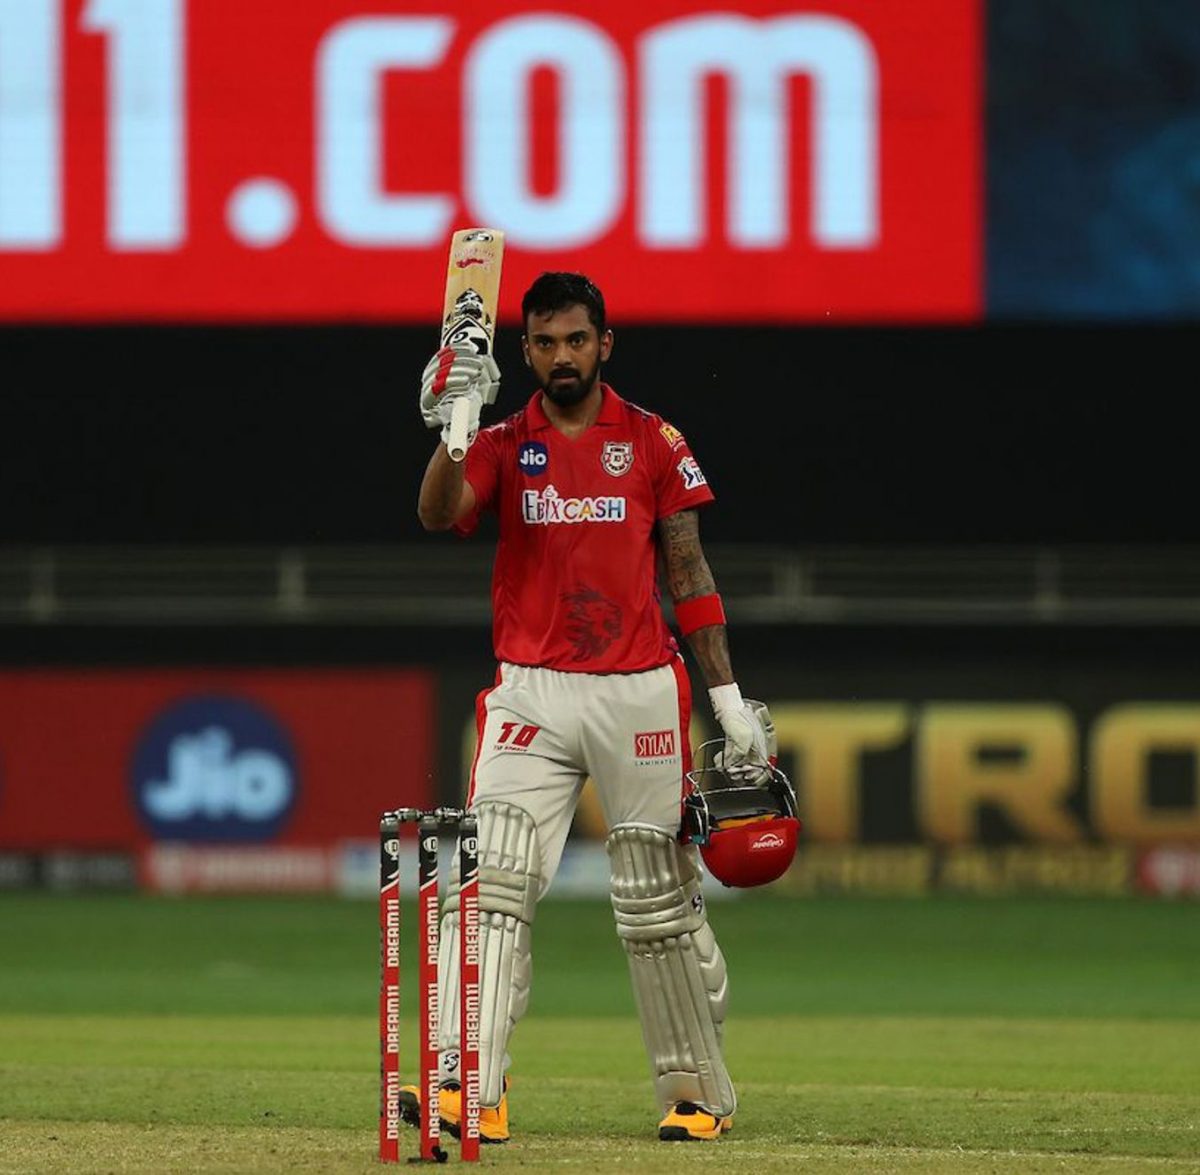 KL Rahul scored an unbeaten 132 off 69 balls, with the help of 7 sixes and 14 fours.
